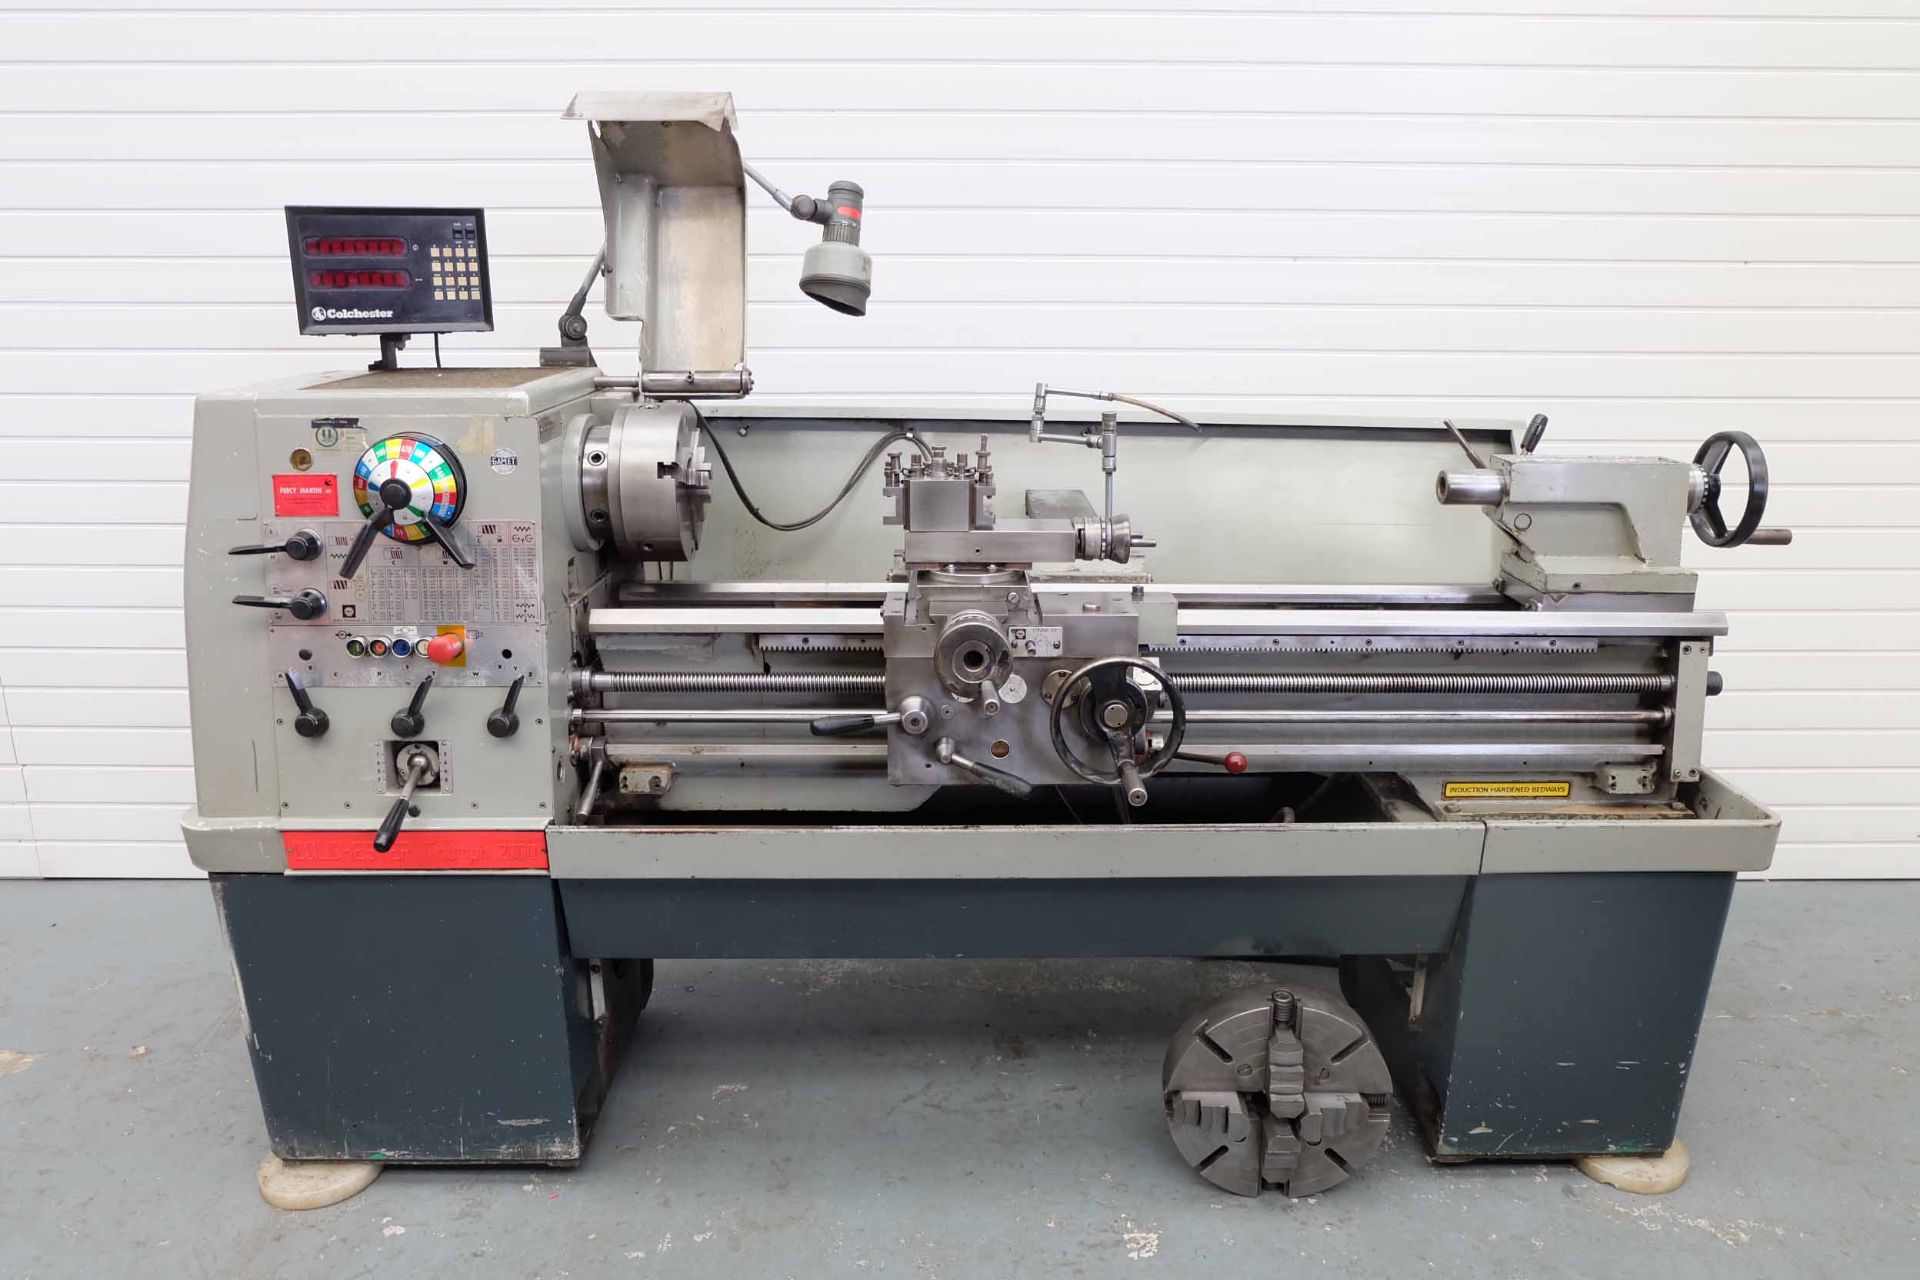 Colchester Triumph 2000 Gap Bed Centre Lathe. Admits Between Centres 50". Swing Over Bed 15 1/4". Sw